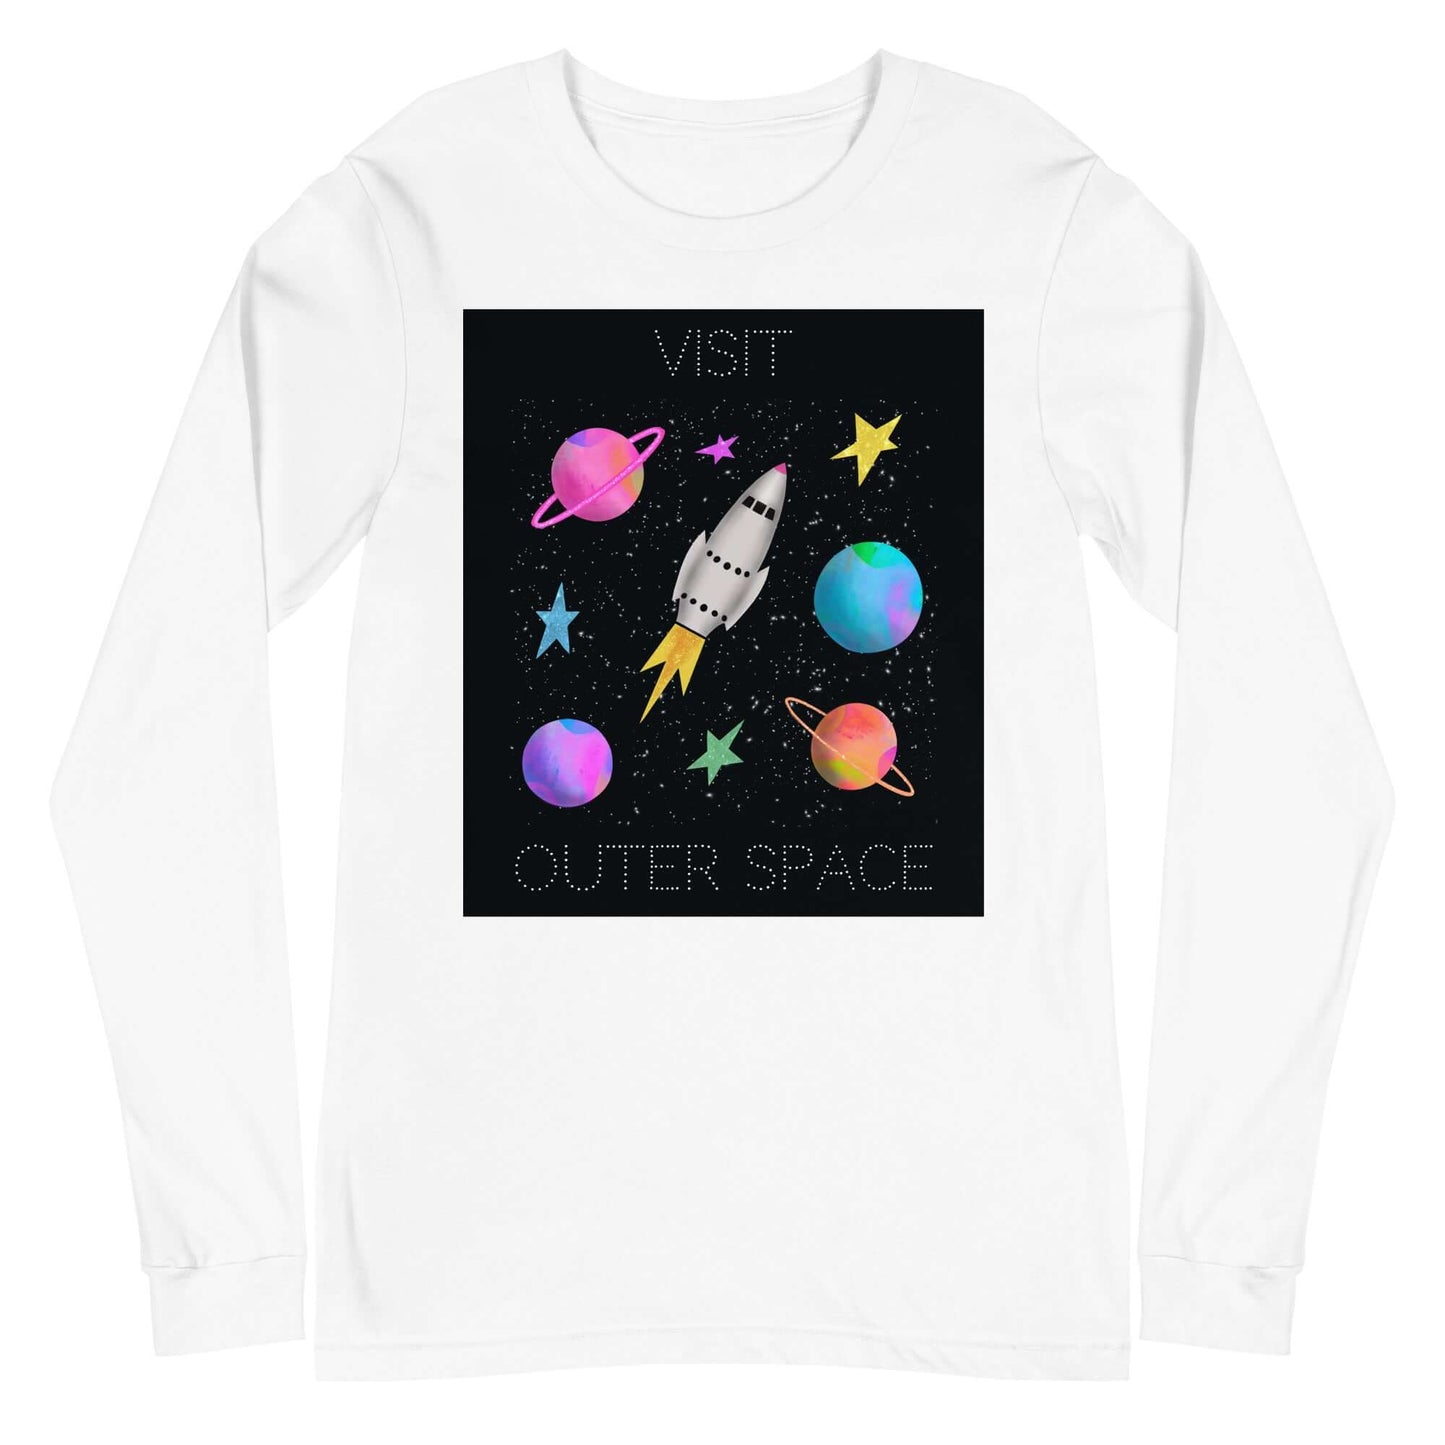 Whimsical Space Rocket with Colorful Planets and Stars on Black Background with Text “Visit Outer Space” Unisex Long Sleeve Tee in White